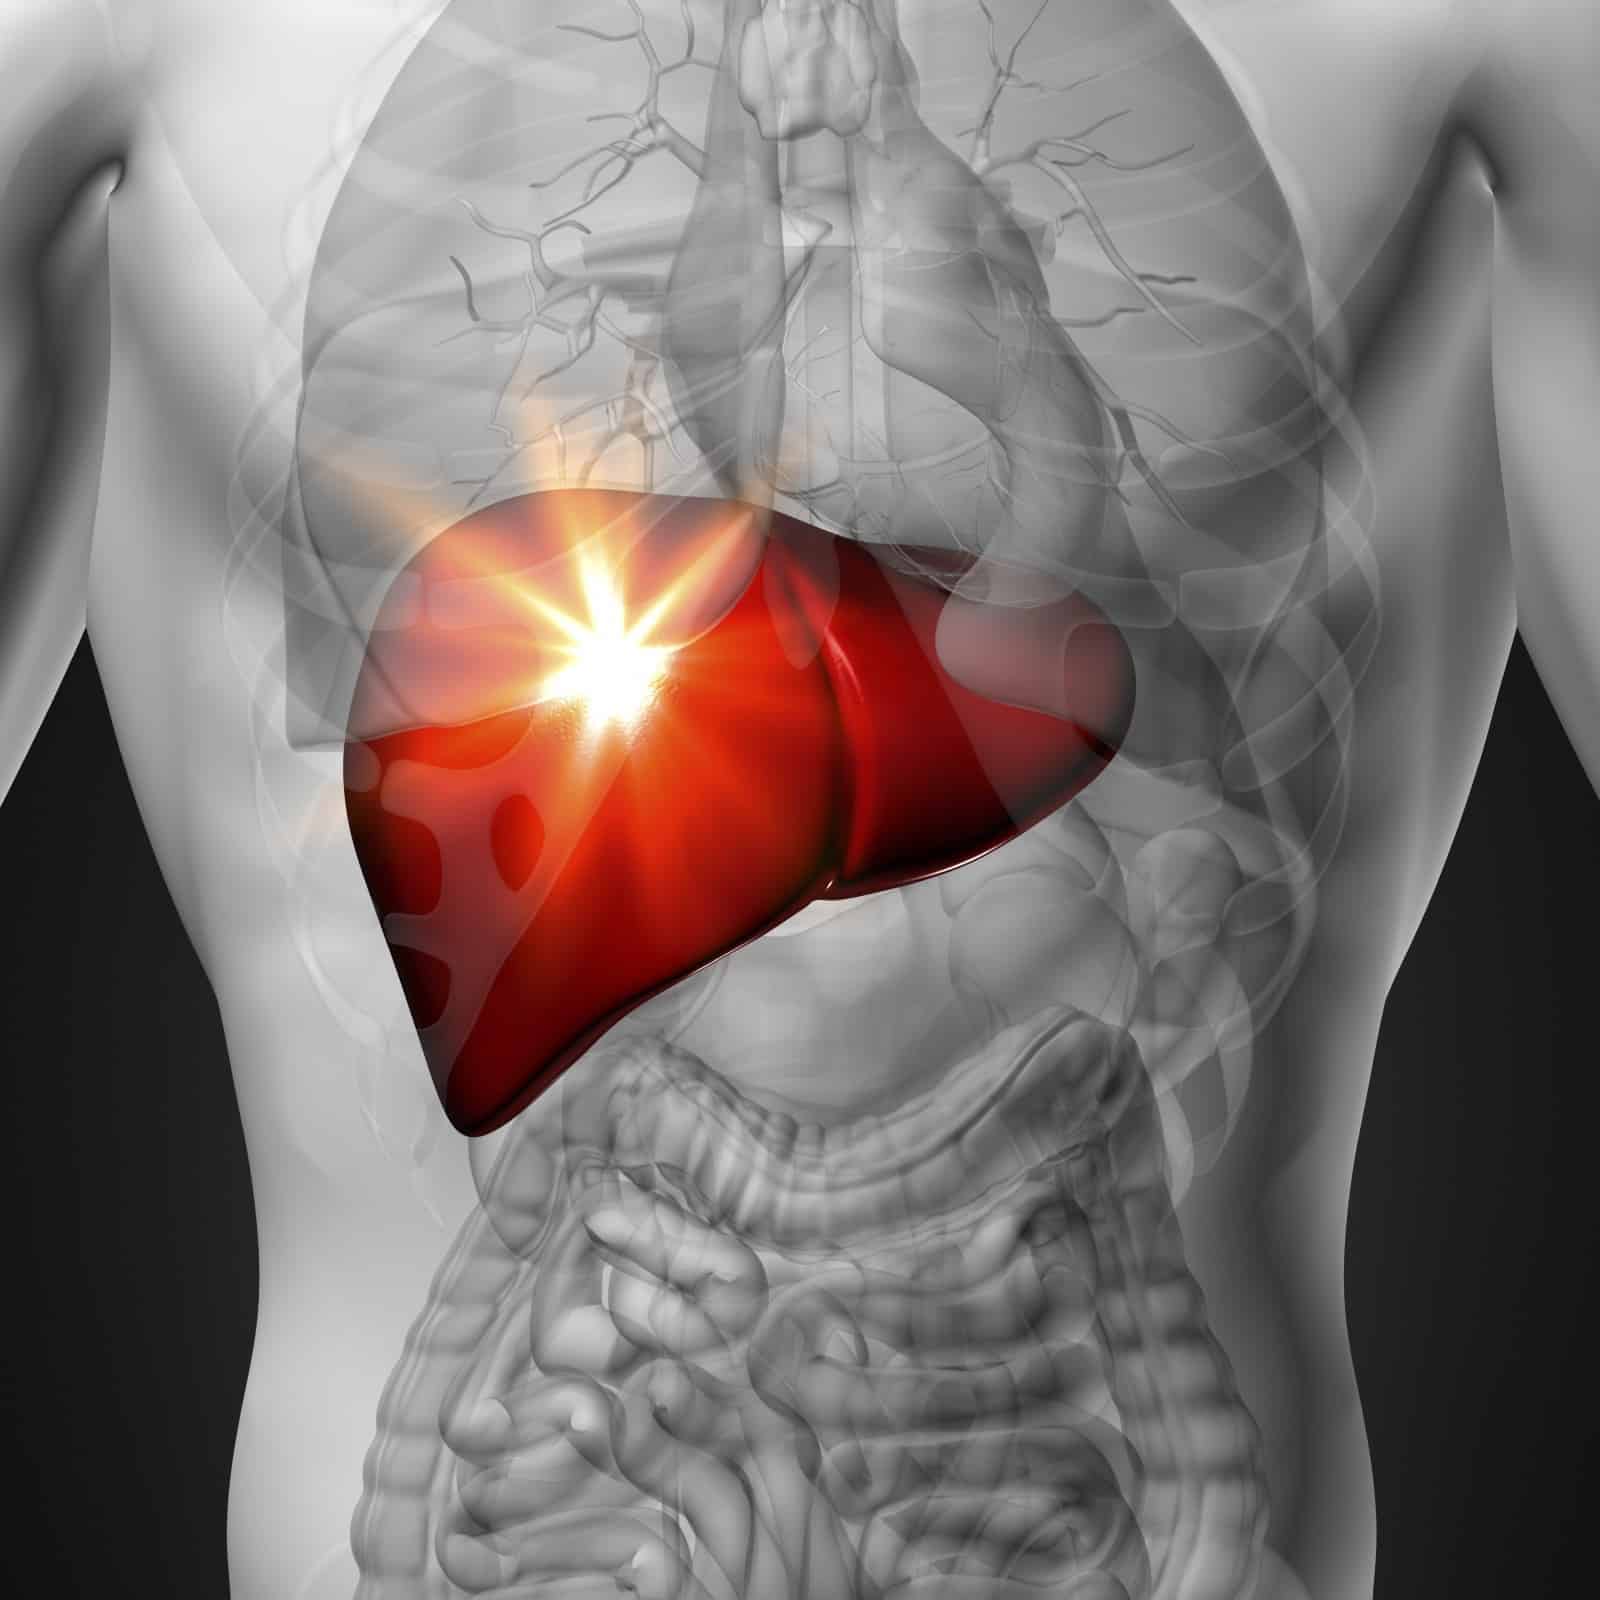 10 Key Facts About Liver Awareness